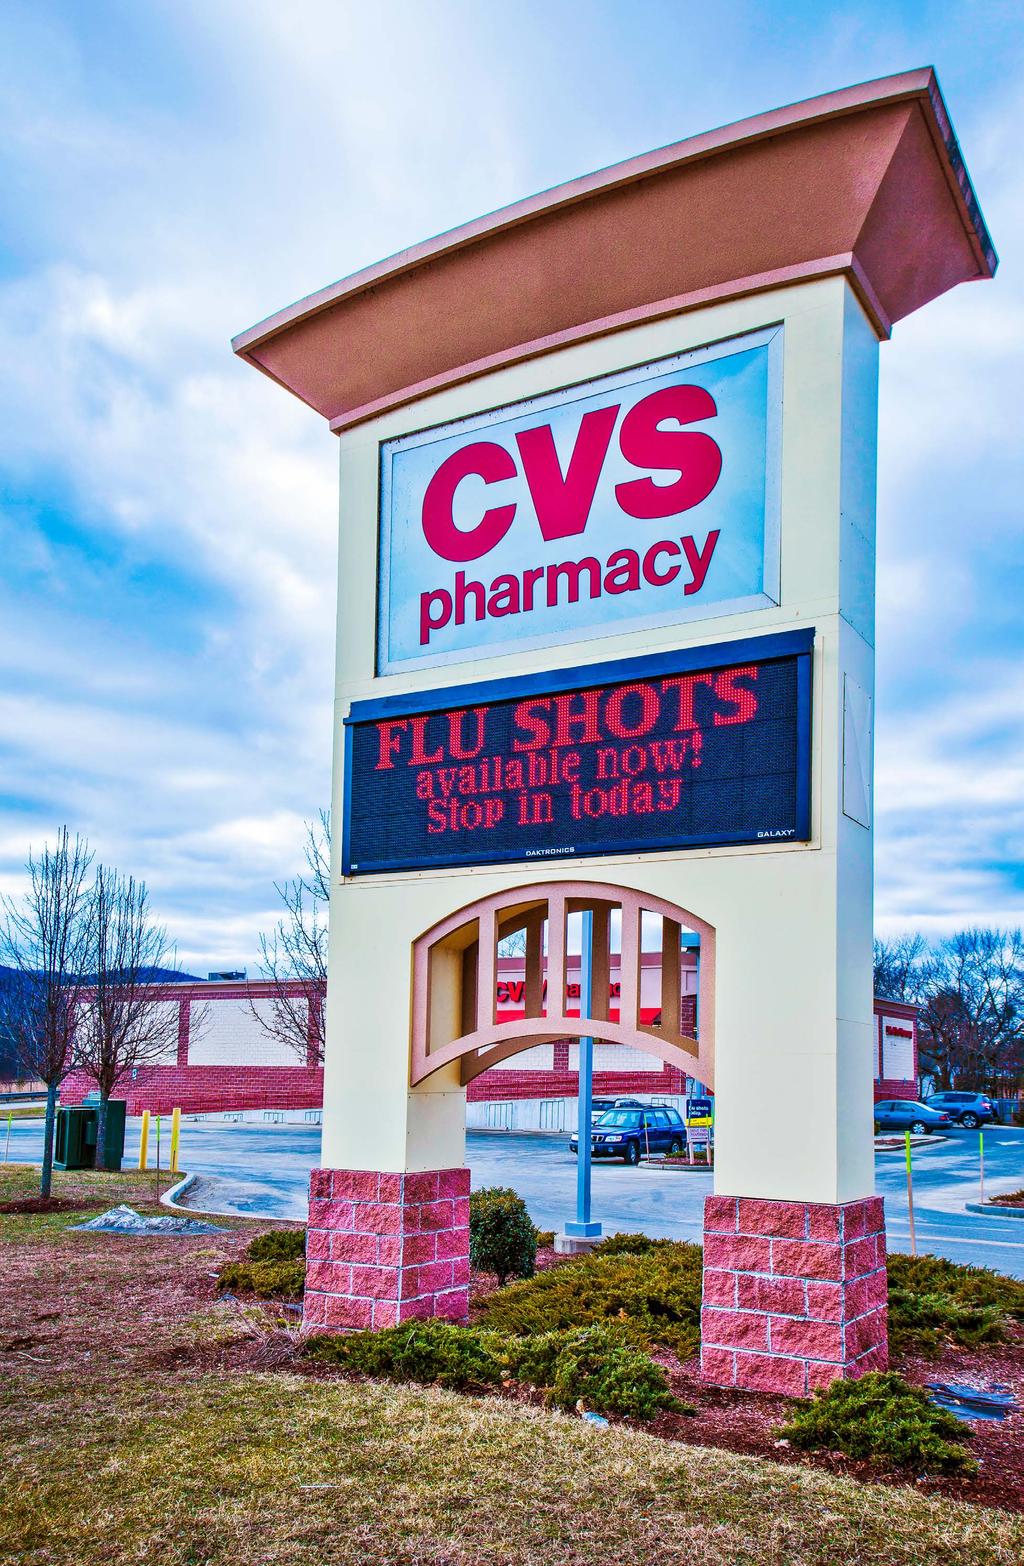 4 4 Executive Summary THE OFFERING Thomas Company is pleased to offer for sale an unlevered CVS store located in Ware, MA. The store was newly constructed and opened for business in 2008.